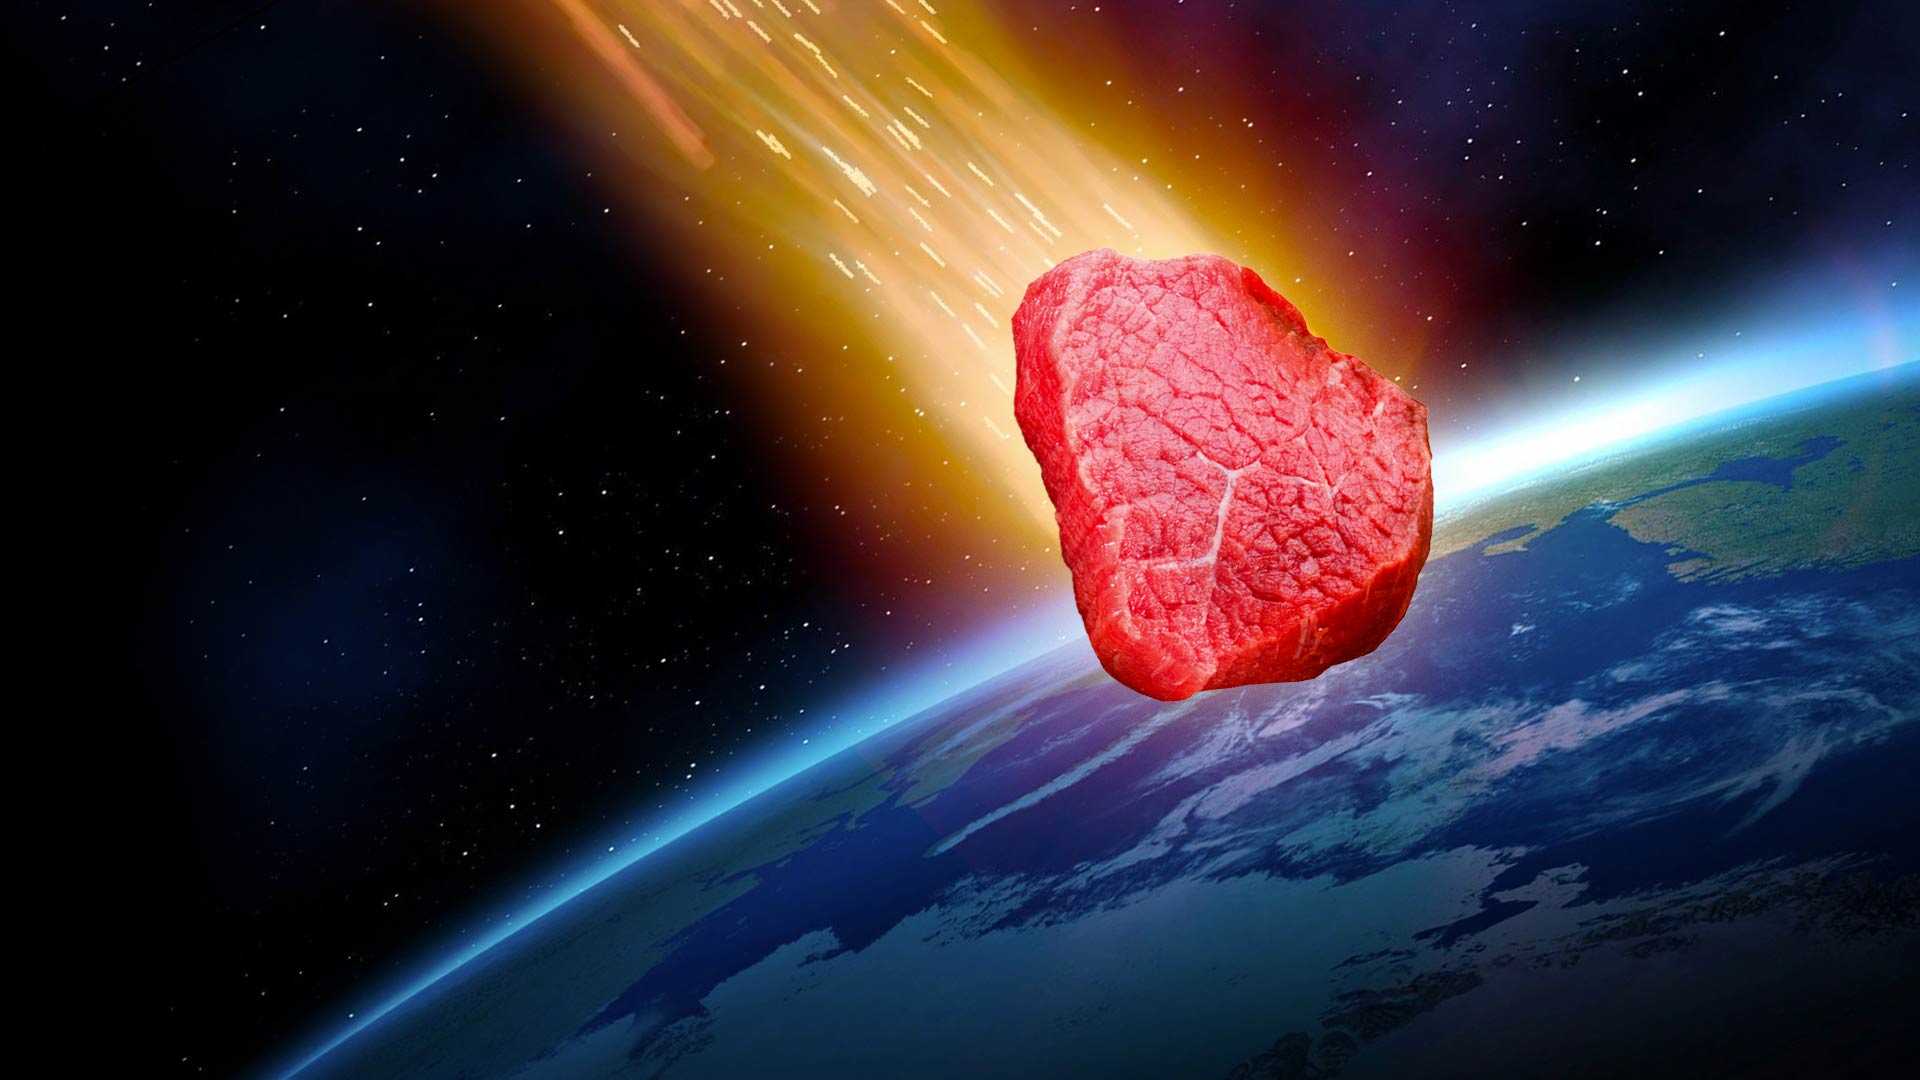 Meat production in space is currently being studied on the International Space Station